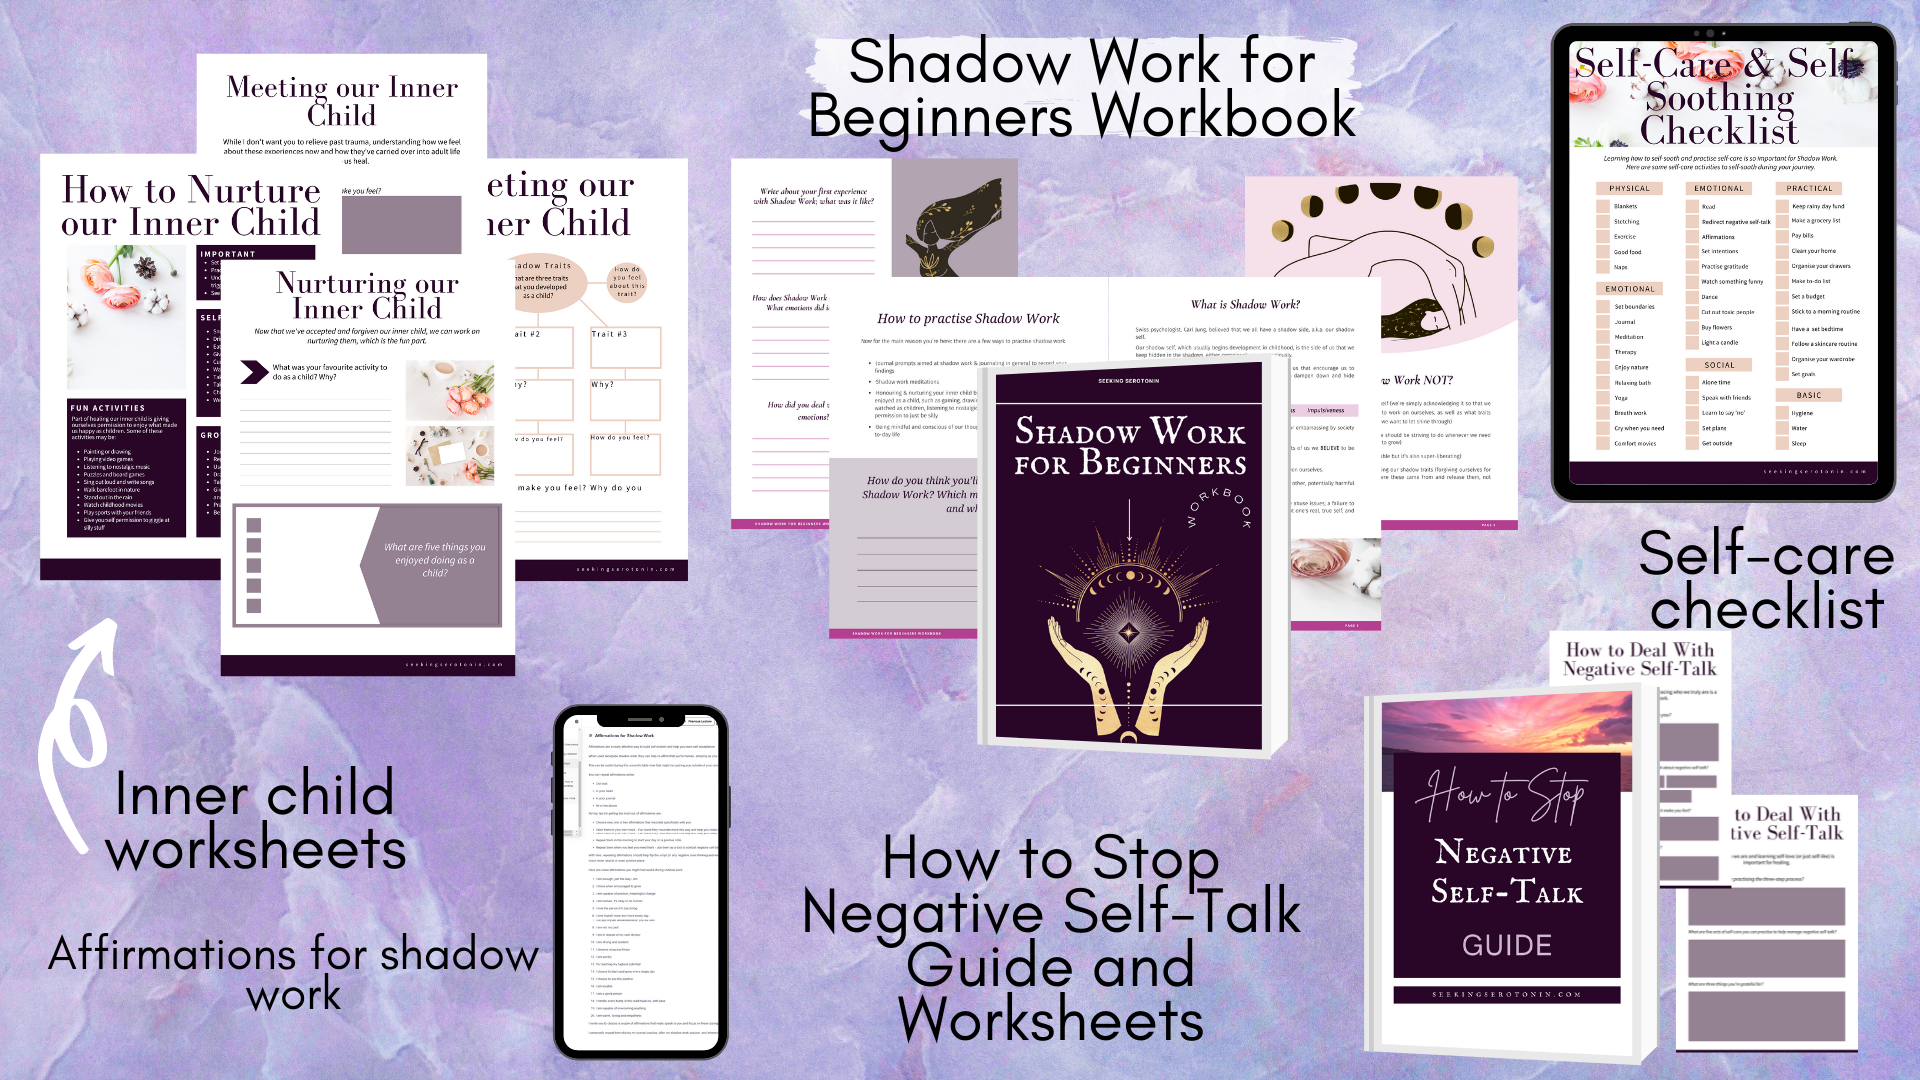 Everything included when you buy the Shadow Work for Beginners workbook